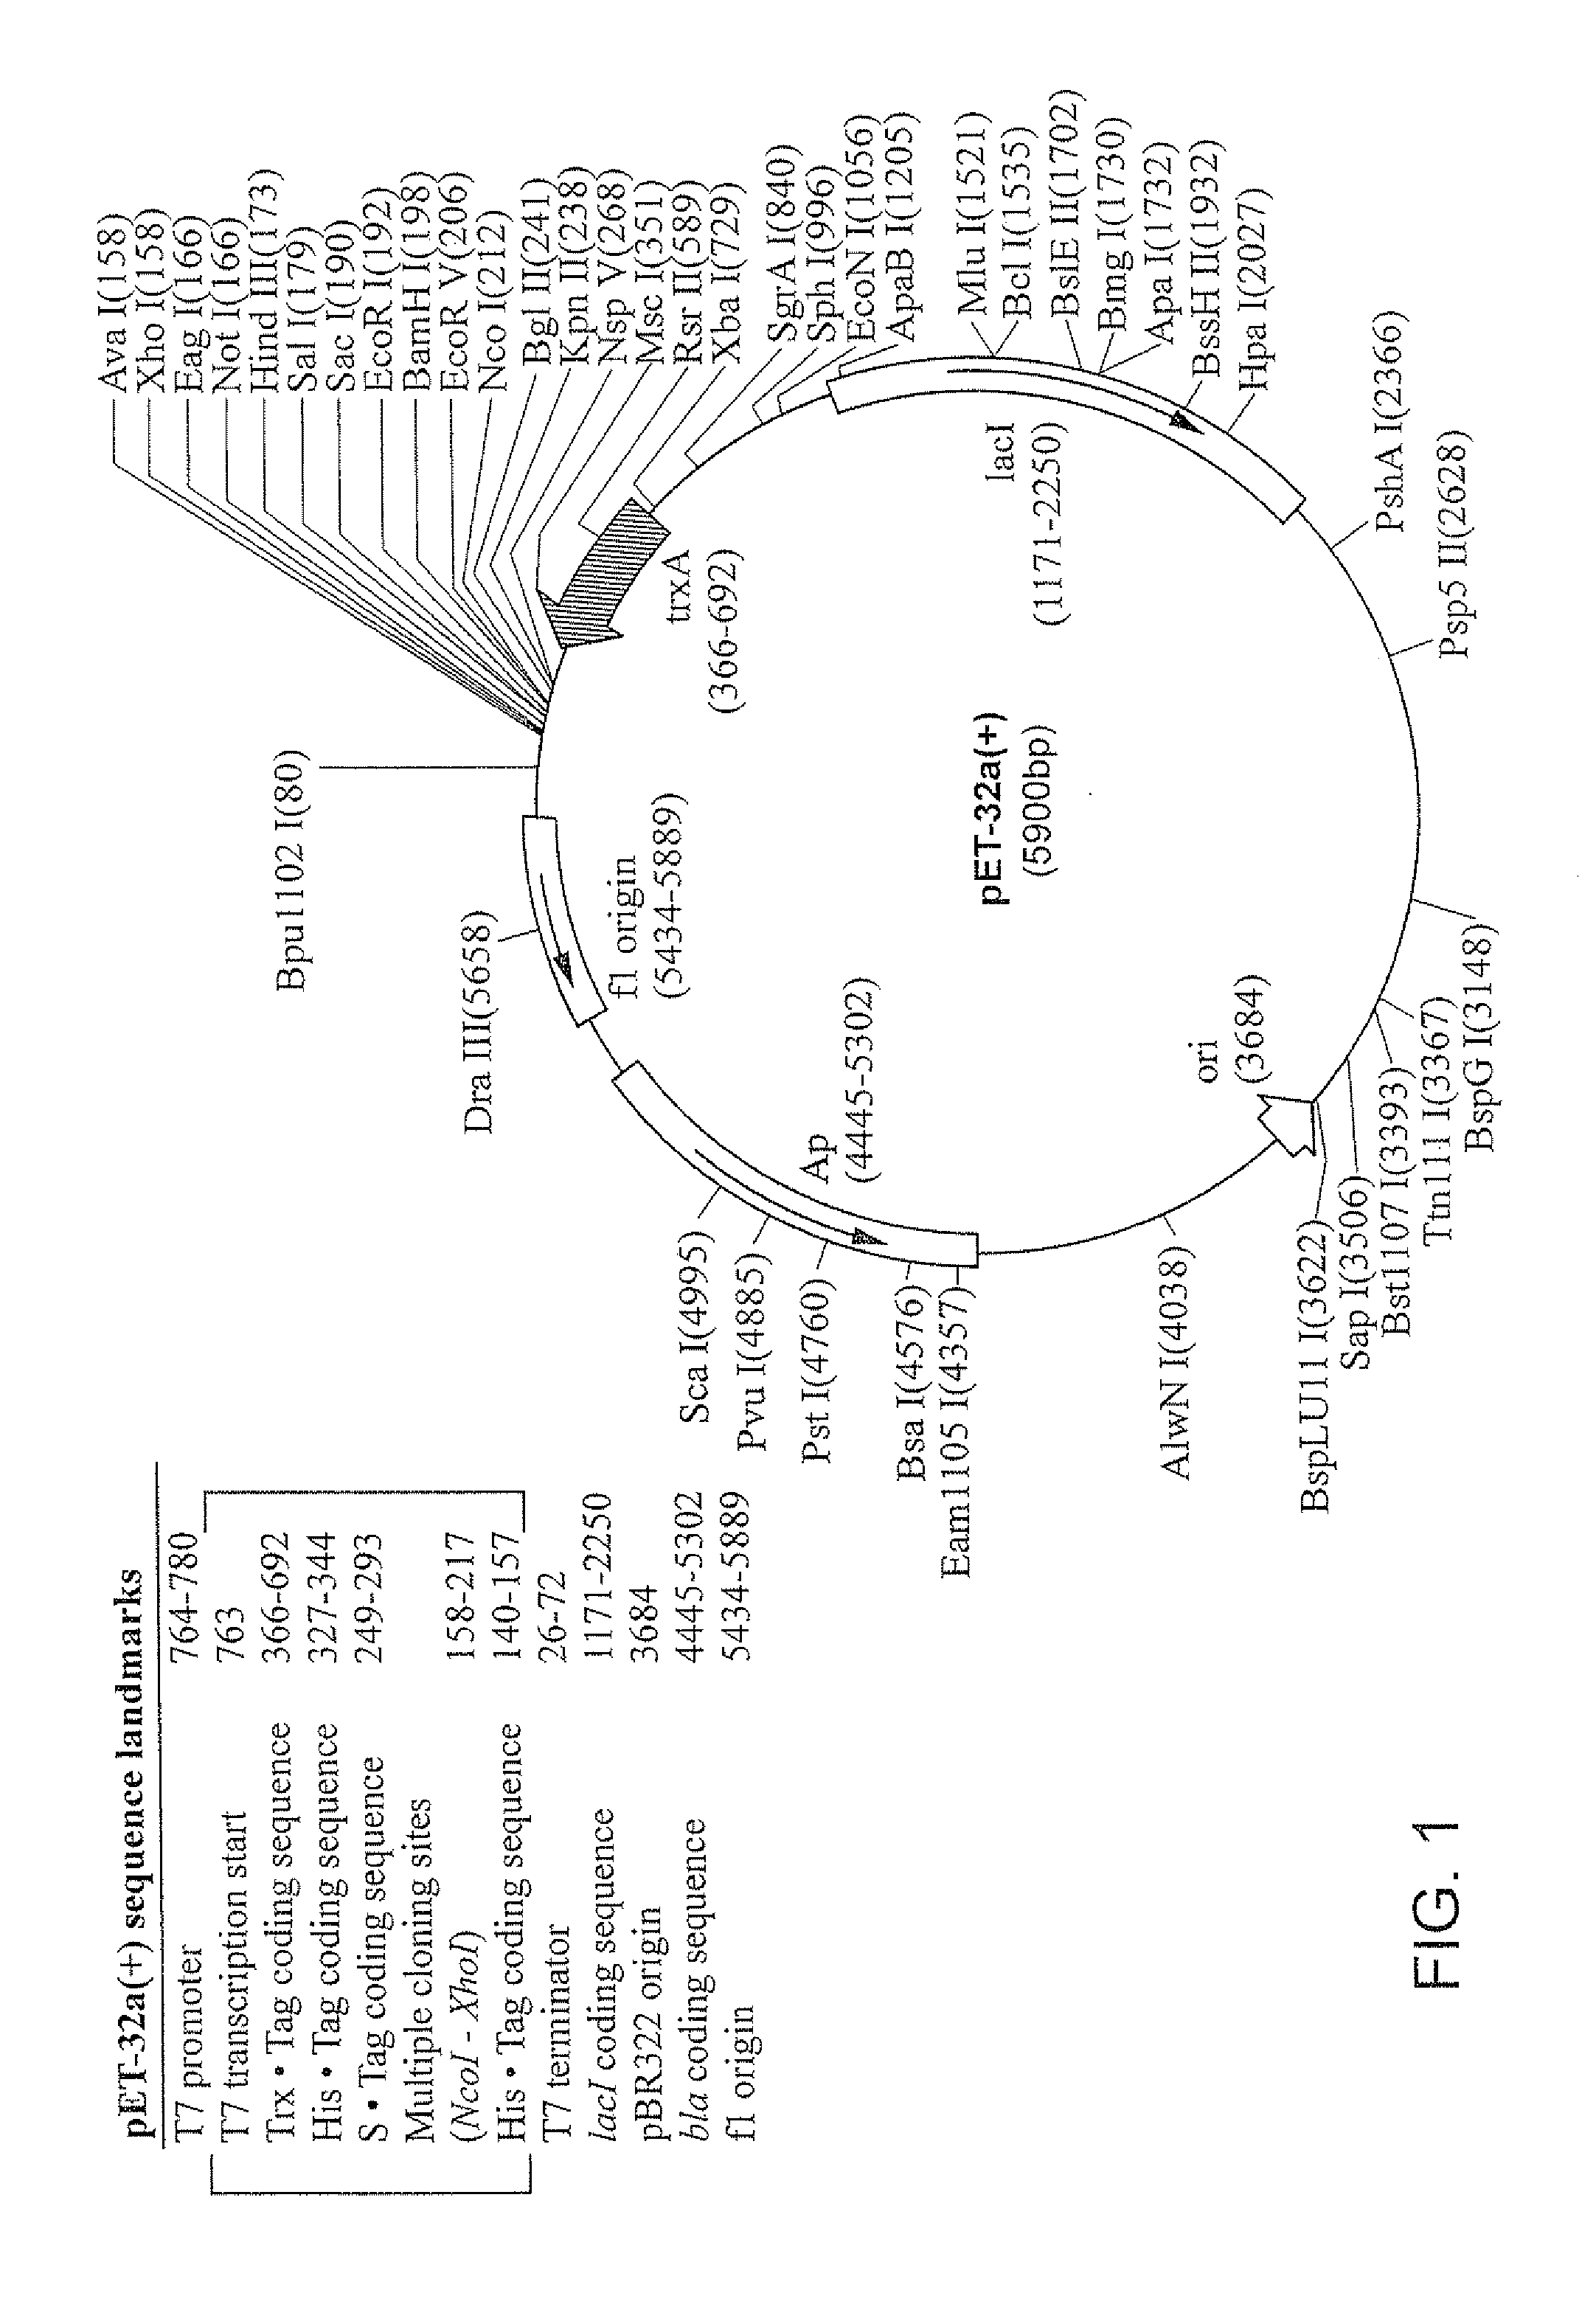 HPV antigens, vaccine compositions, and related methods